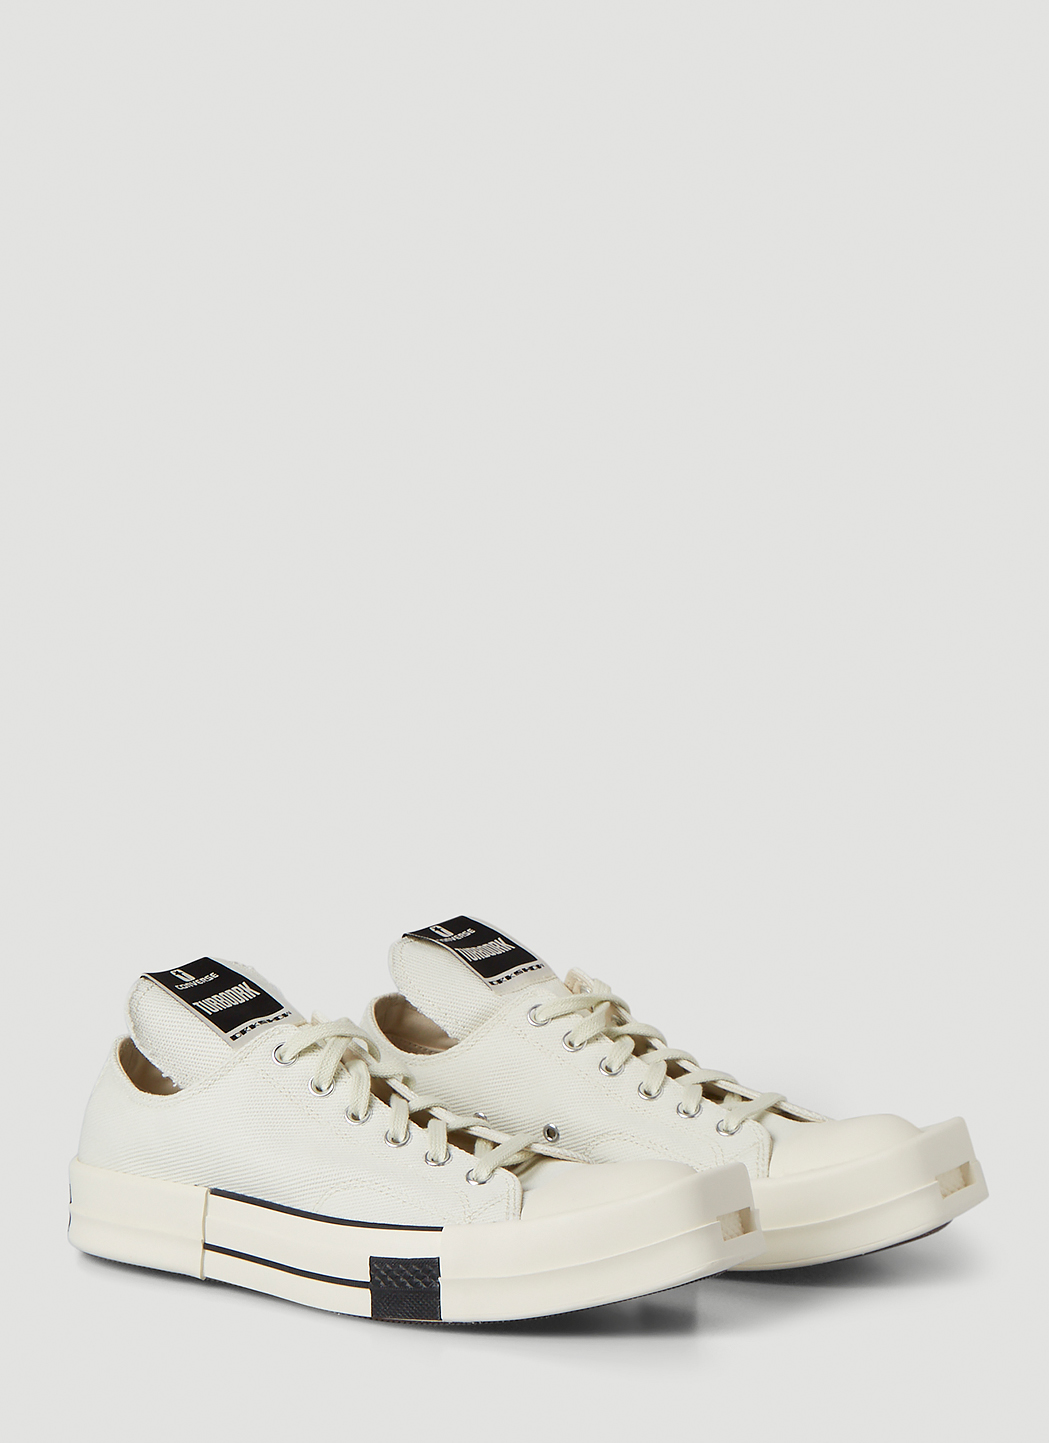 Rick Owens X Converse Unisex TURBODRK Chuck 70 Ox Sneakers in White | LN-CC